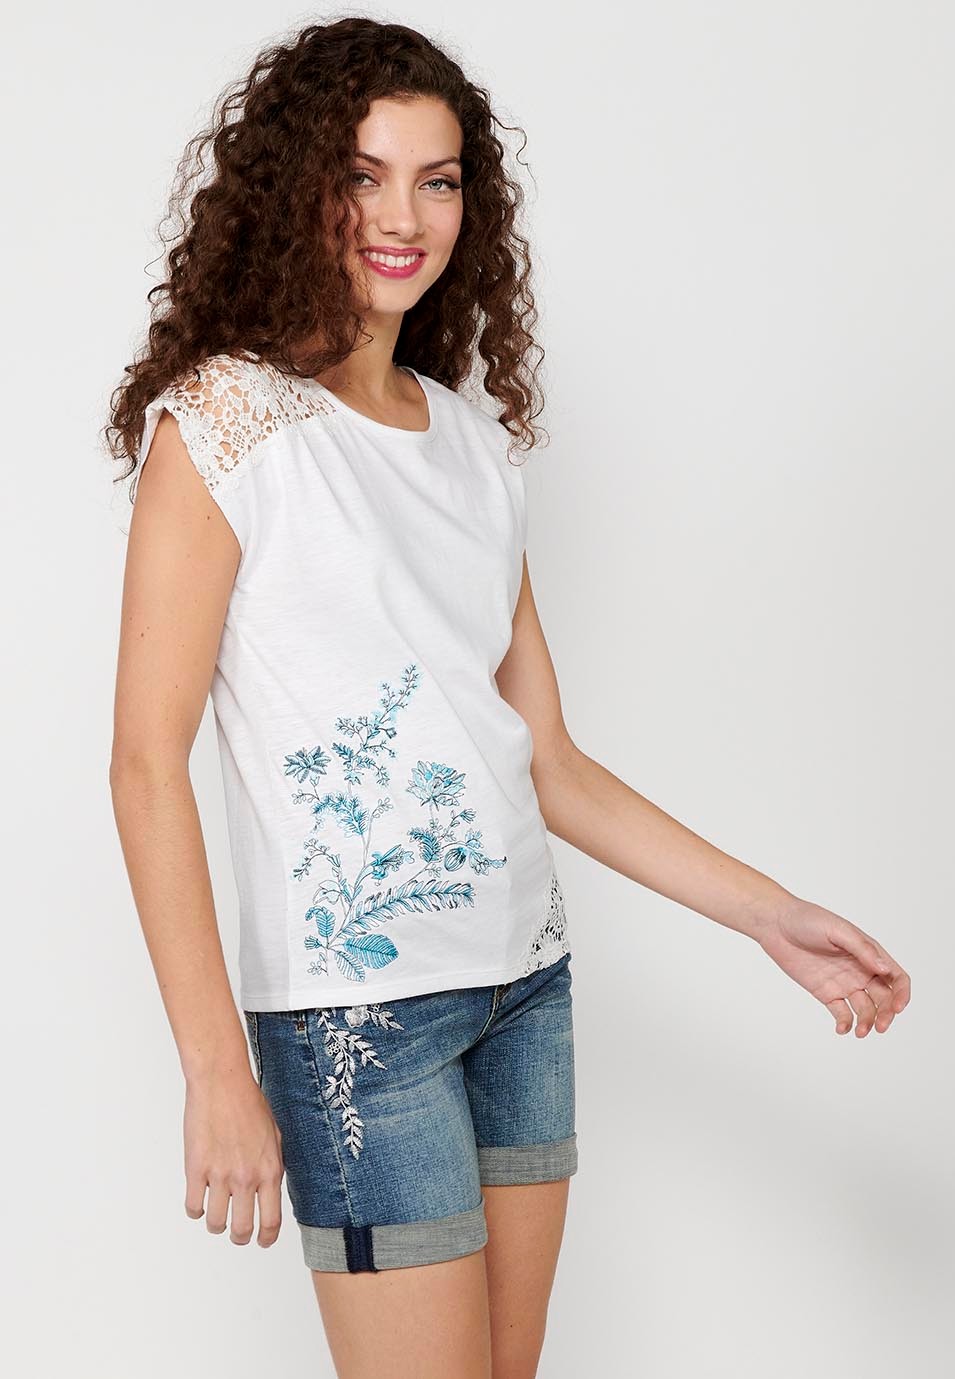 Short-sleeved T-shirt Cotton Top with Round Neck and Front Floral Embroidery in White for Women